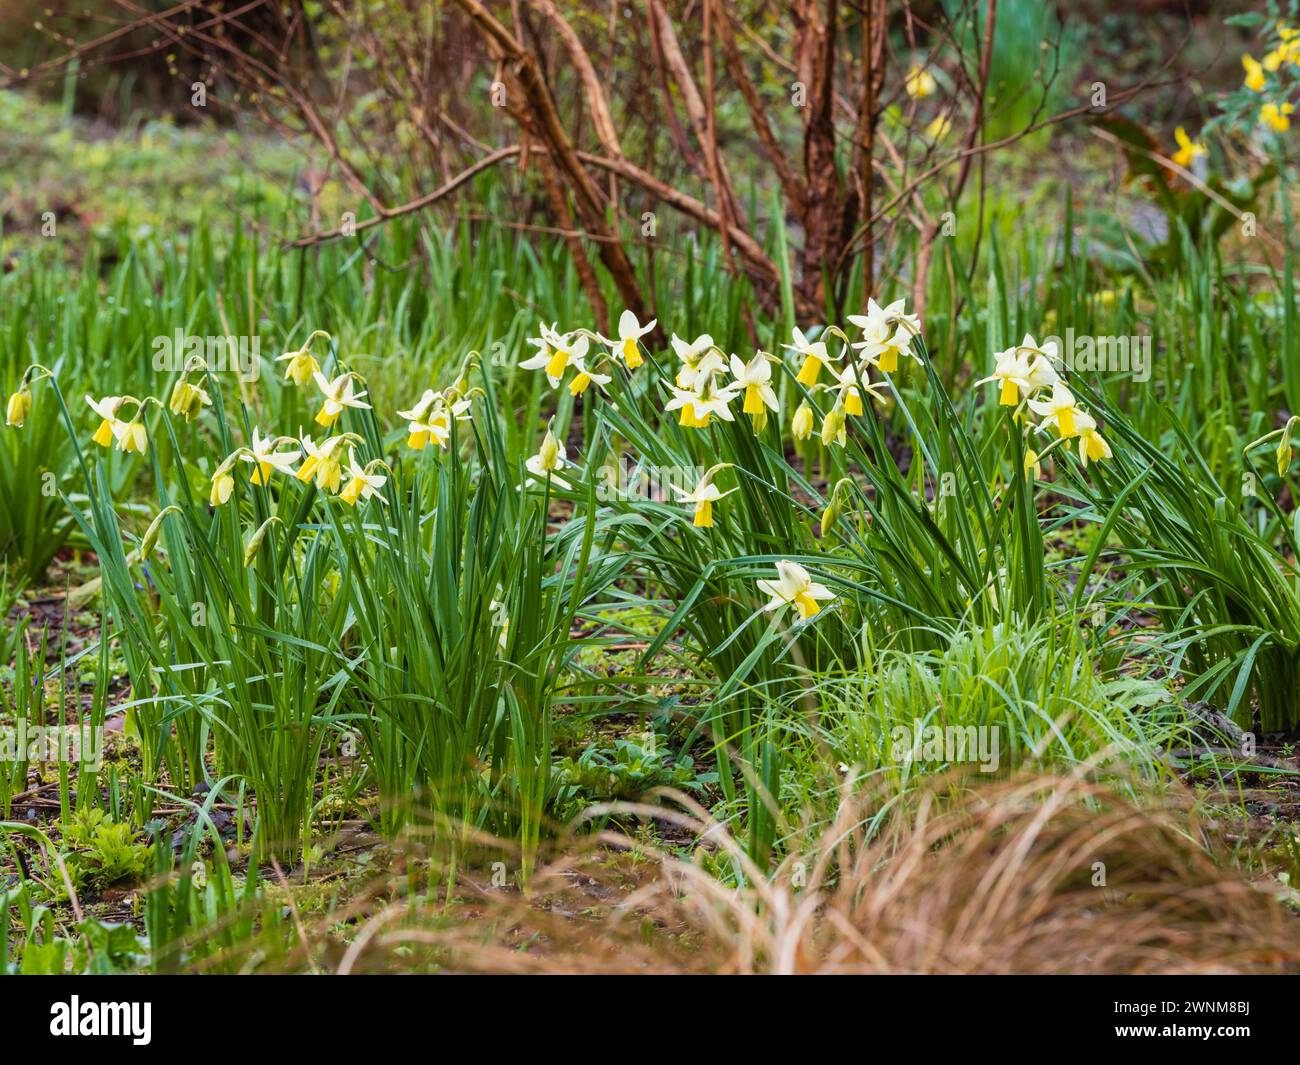 Reflexed white petals and yellow trumpet of the early spring cyclamineus group daffodil, Narcissus 'Jack Snipe' Stock Photo